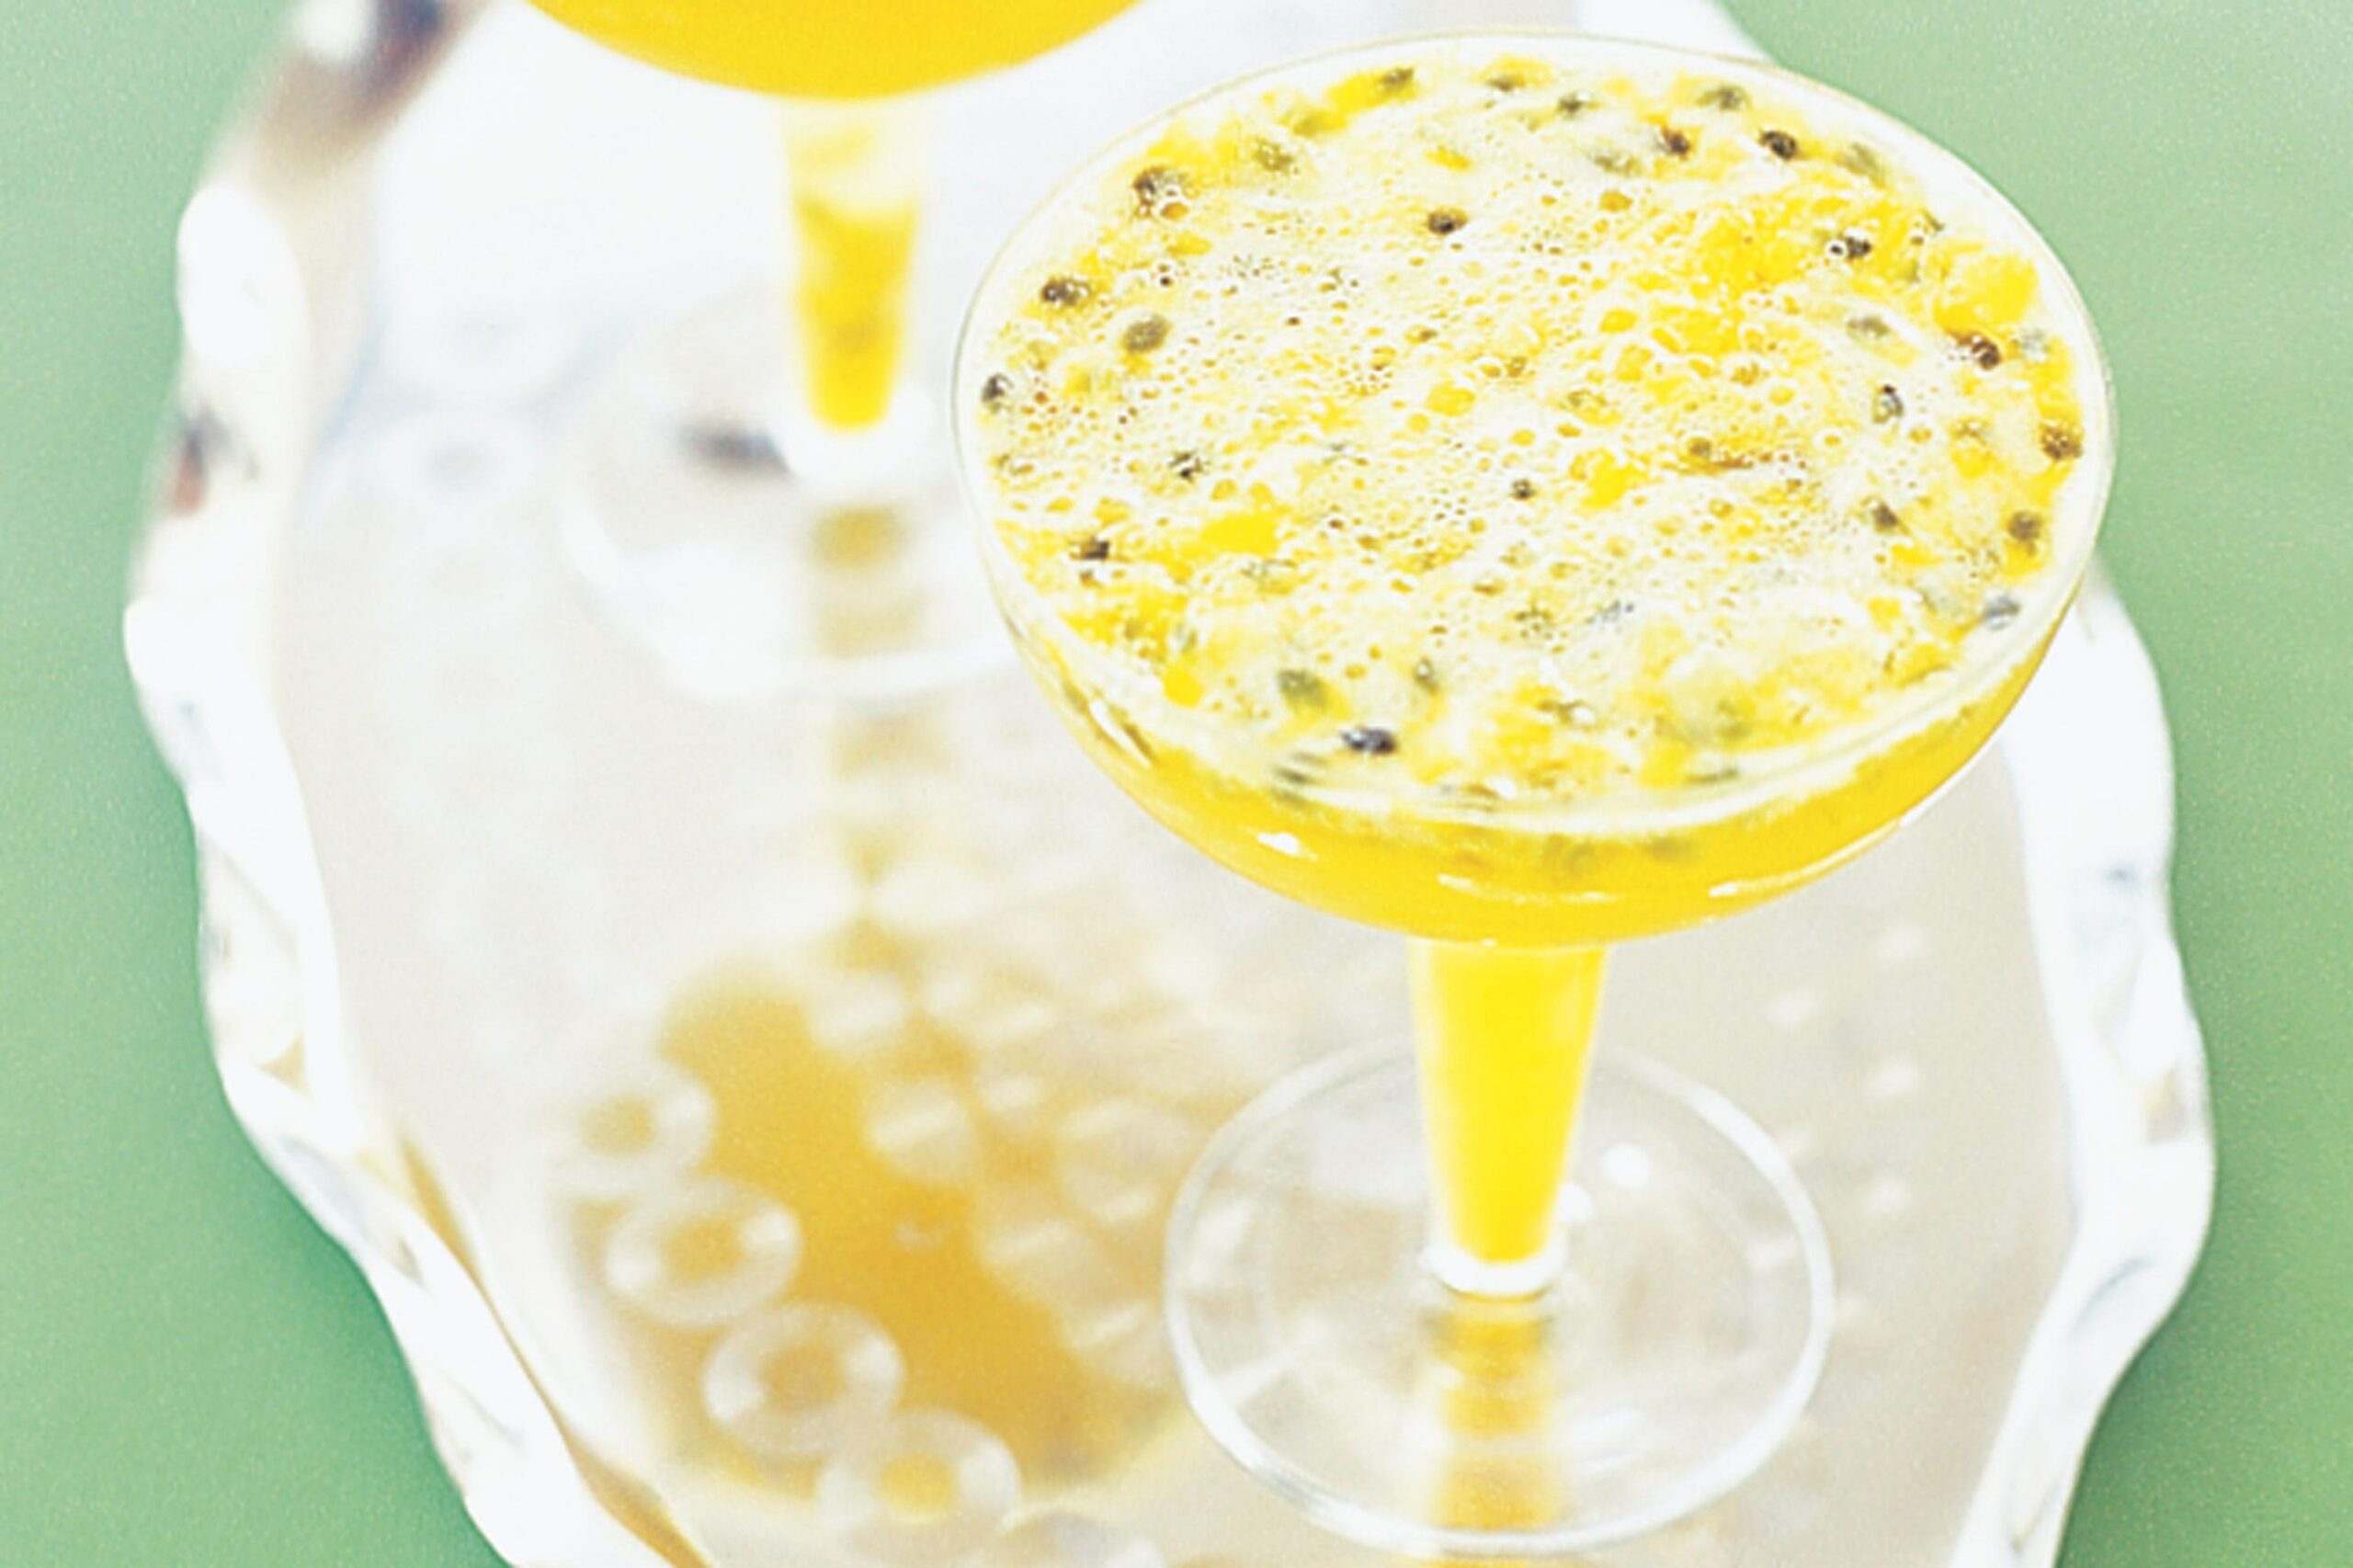  Raise a glass to the perfect summer cocktail with these vibrant passionfruit champagne cocktails!